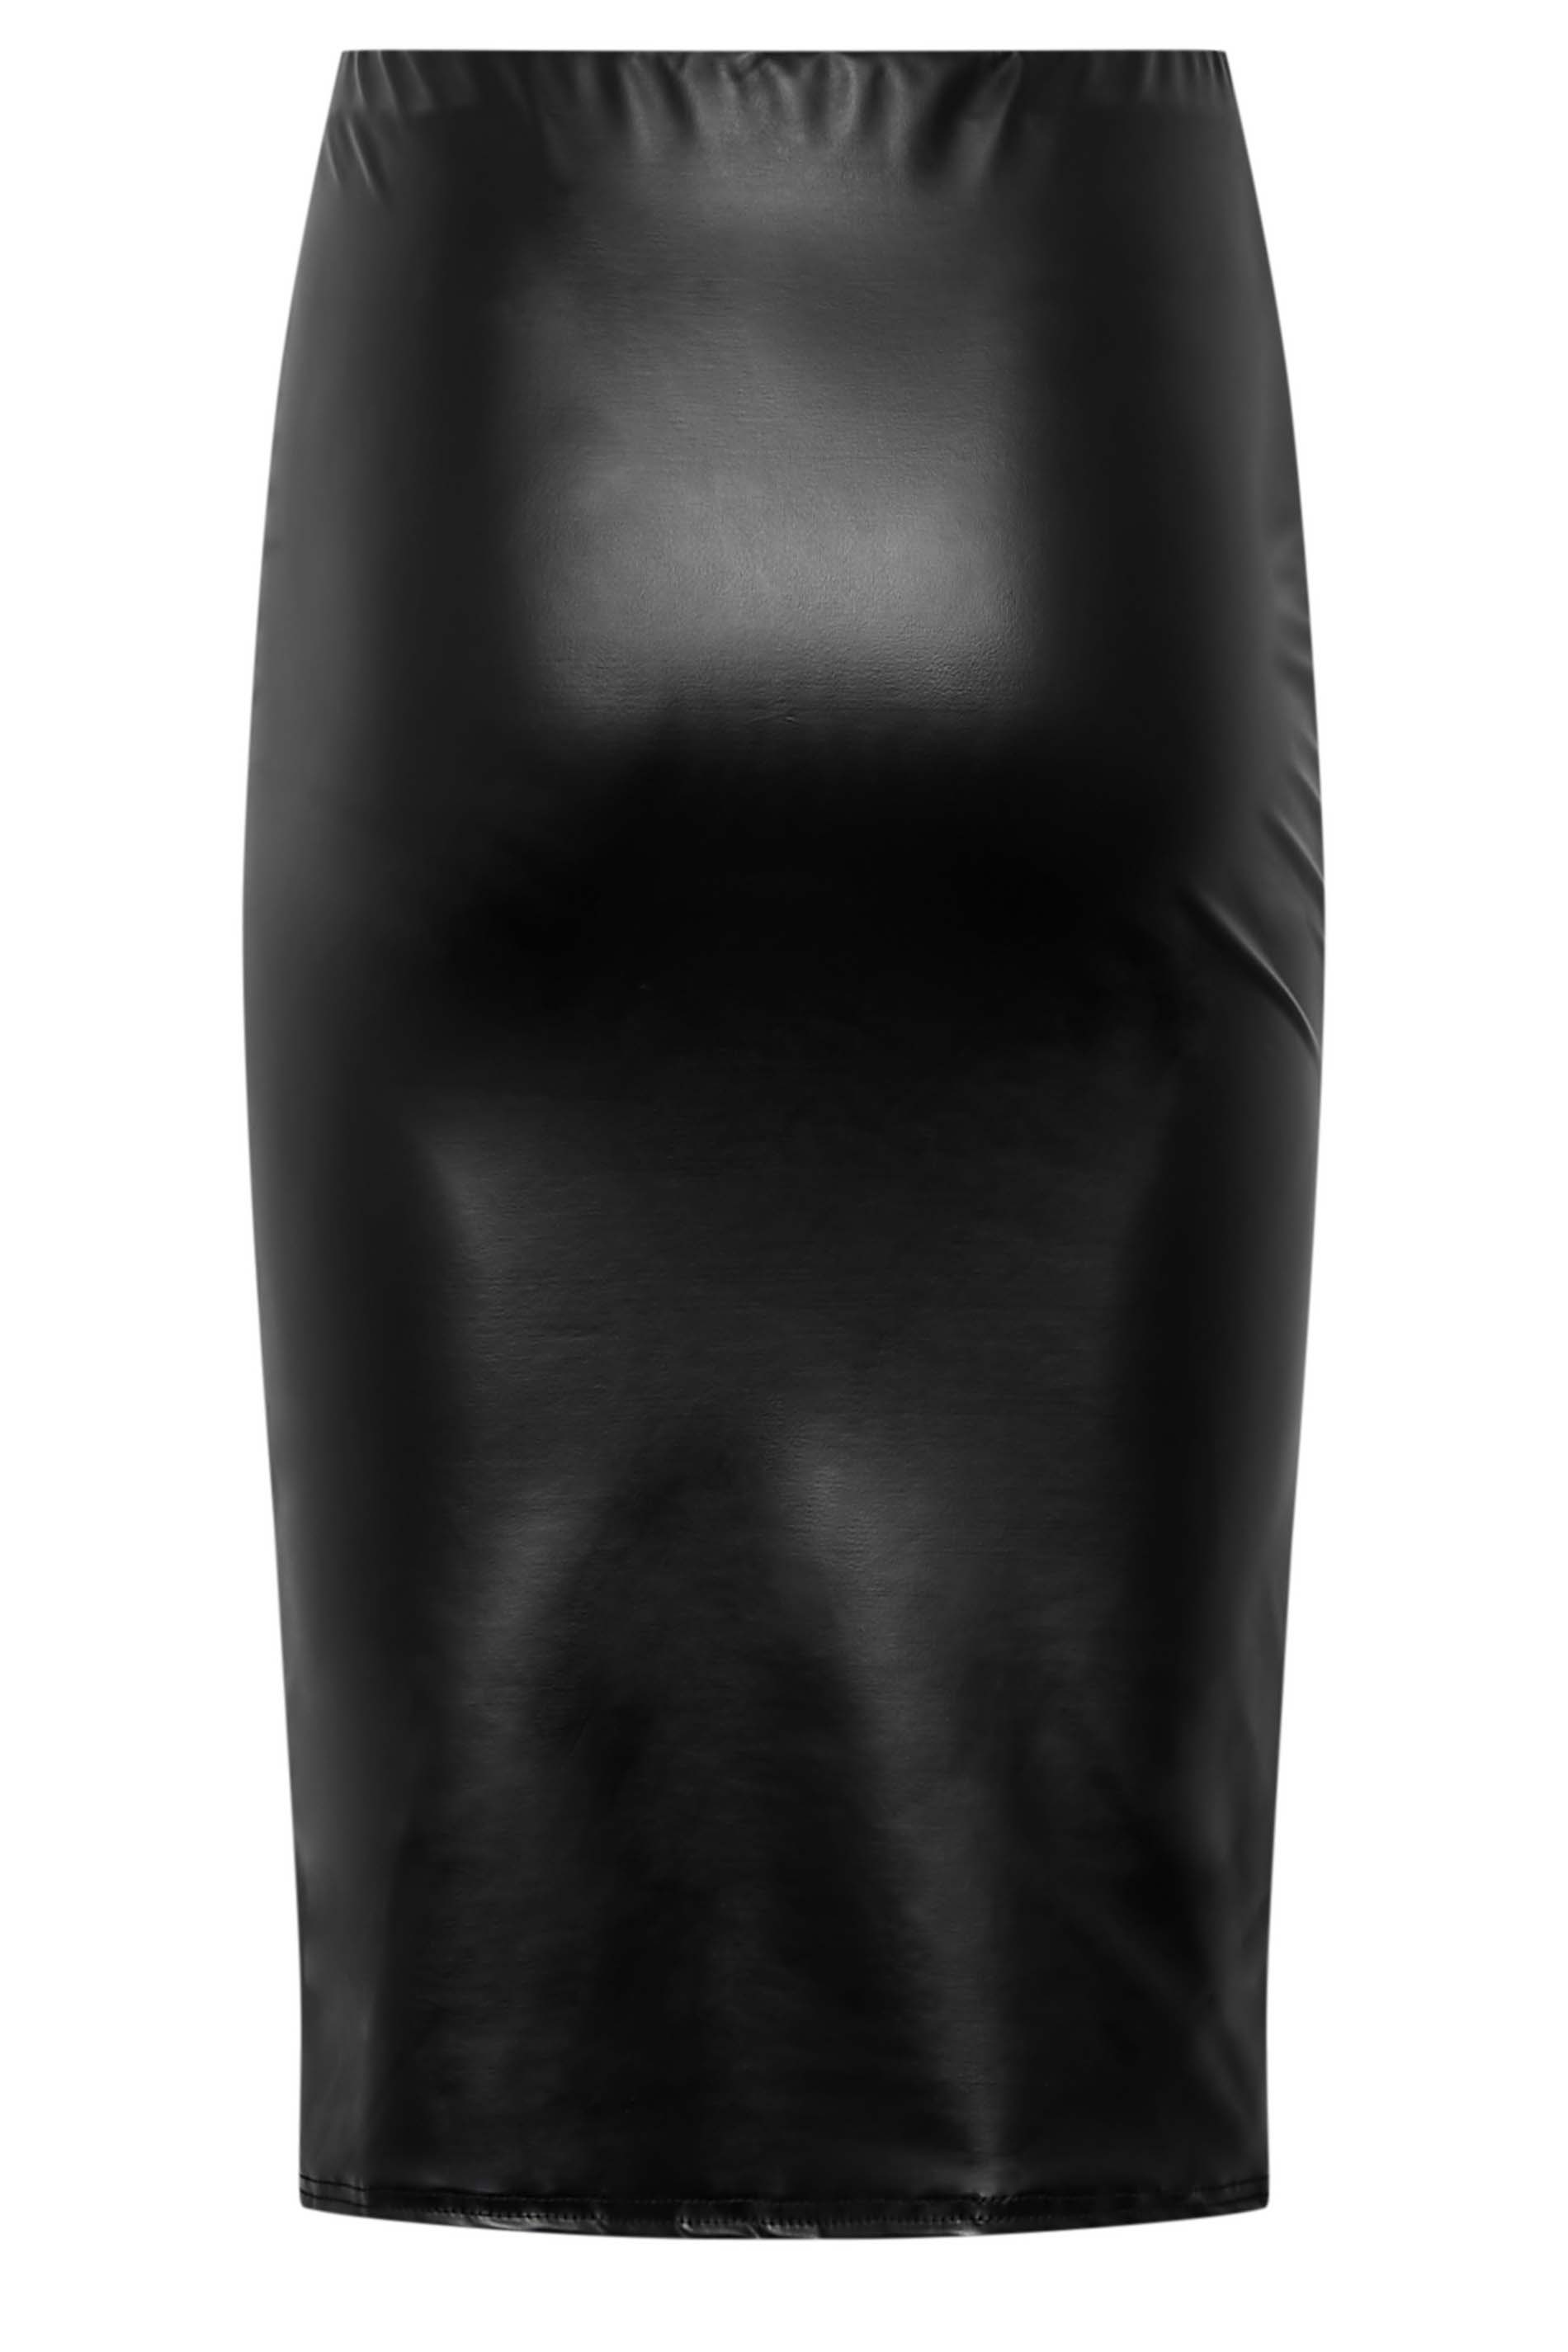 LTS Tall Women's Black Faux Leather Pencil Skirt | Long Tall Sally 3